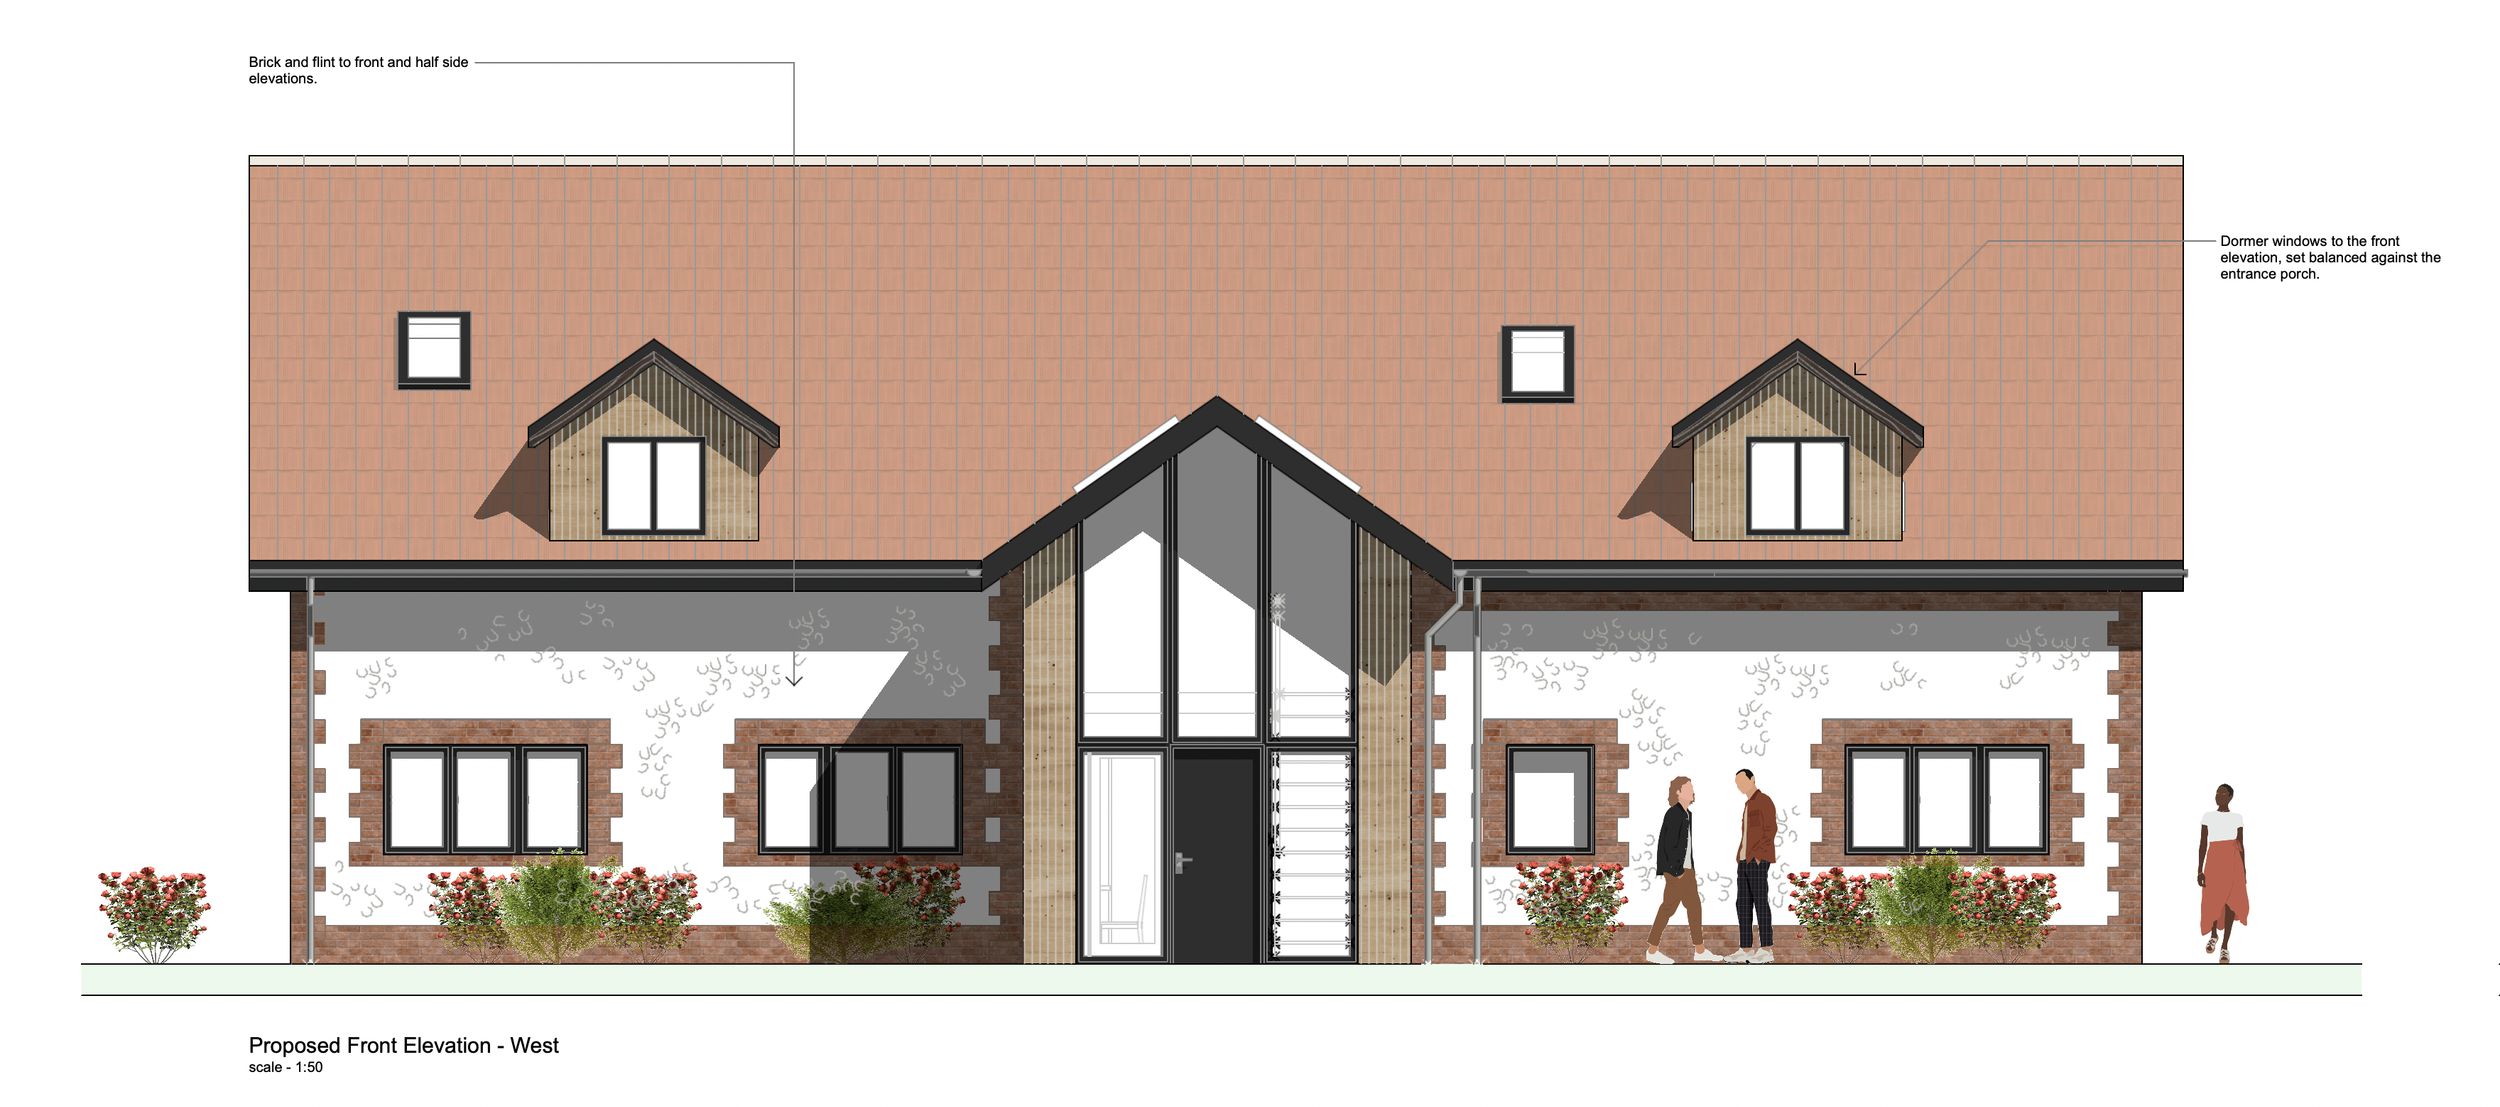 Replacement Dwelling North Norfolk Front Elevation.png